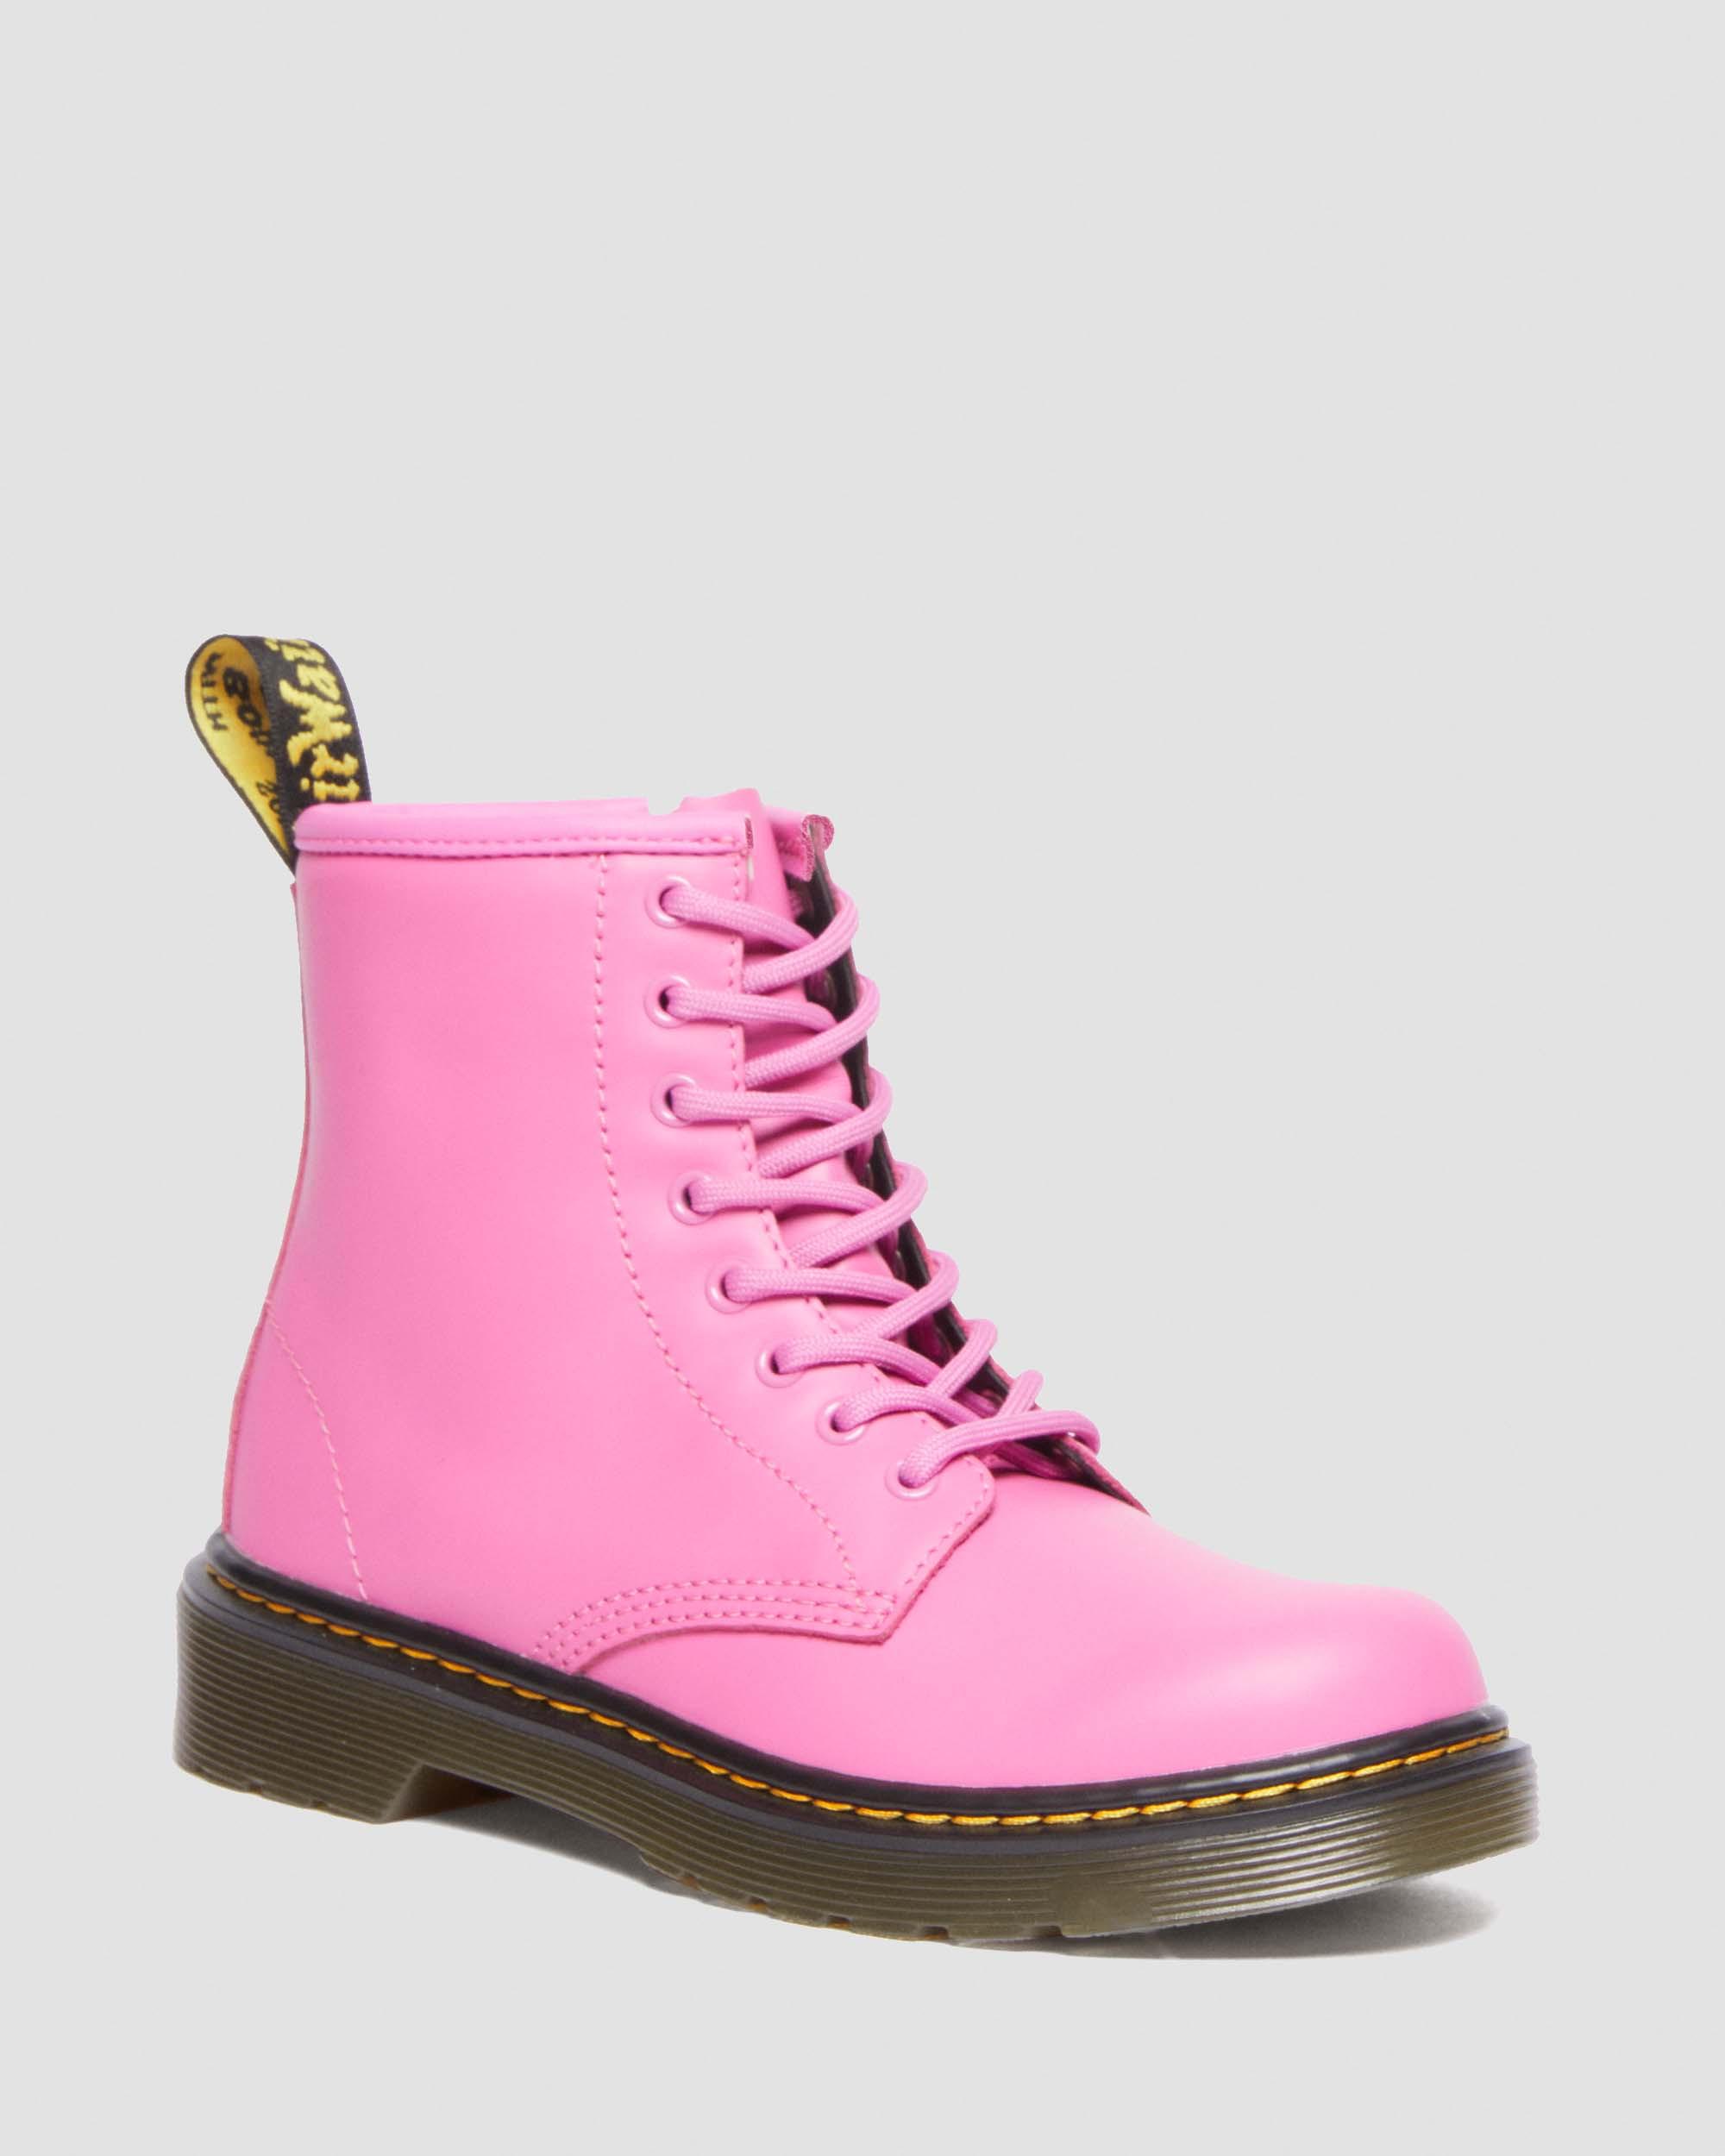 Junior 1460 Leather Lace Up BootsJunior 1460 Leather Lace Up Boots Dr. Martens